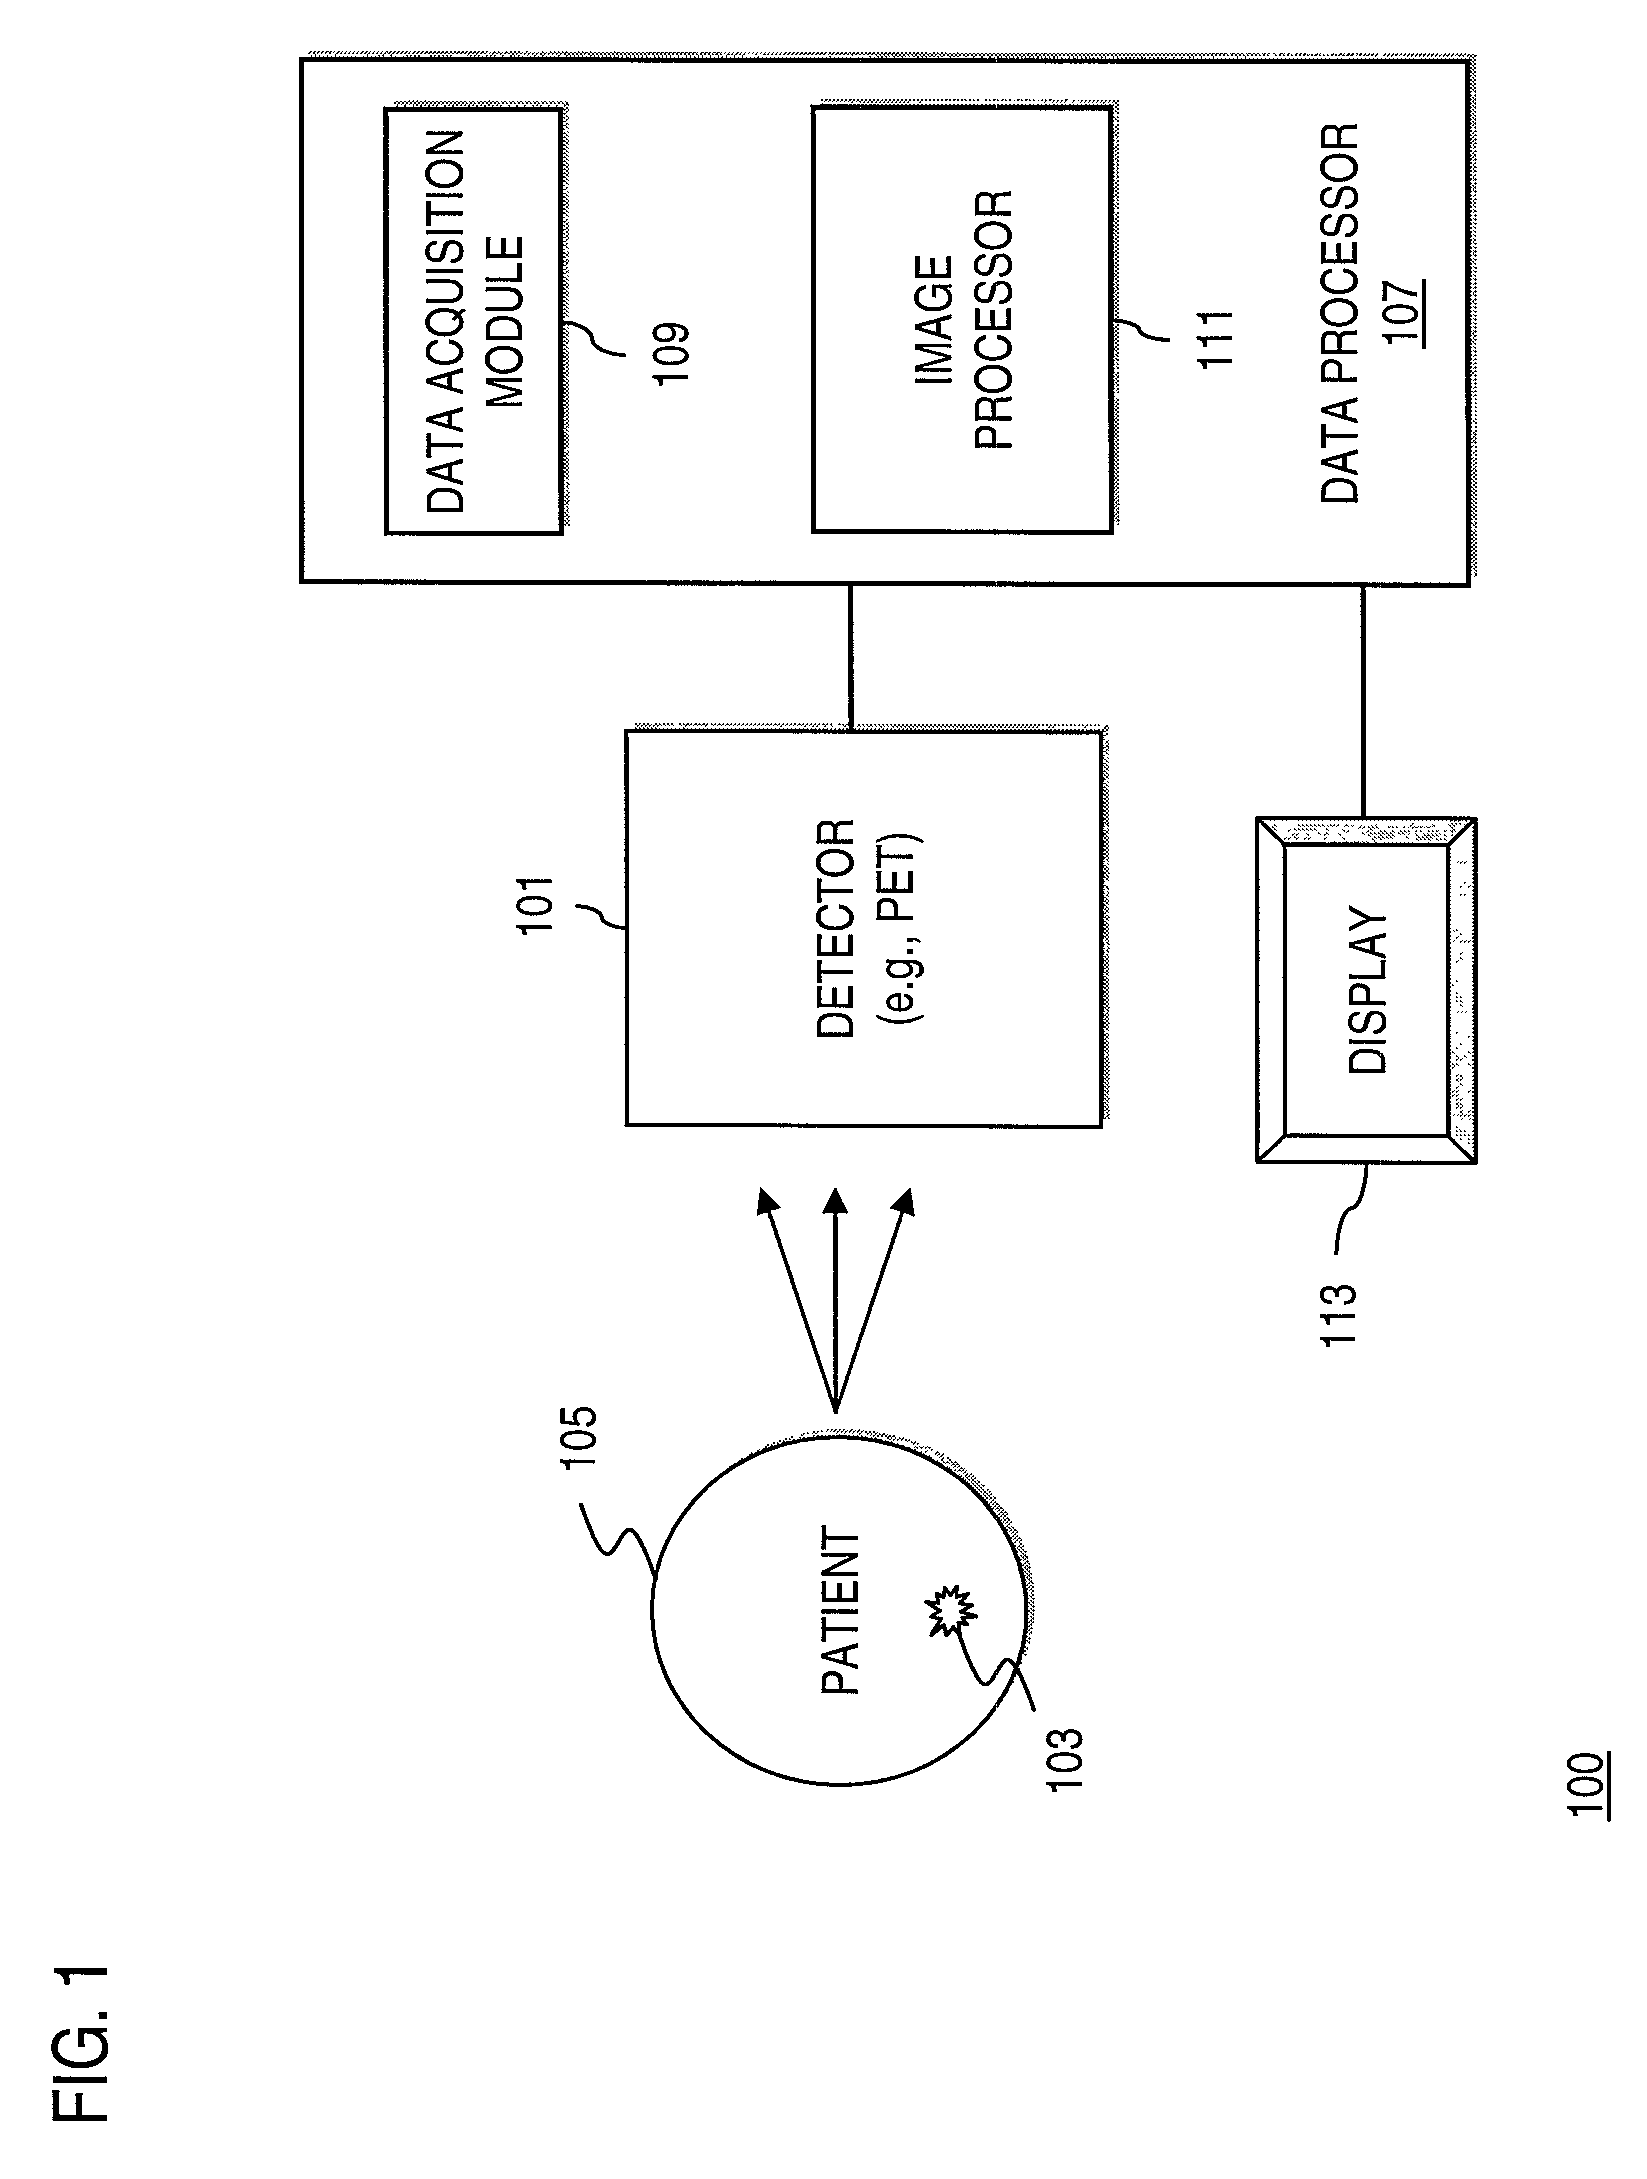 Method and apparatus for providing depth-of-interaction detection using positron emission tomography (PET)